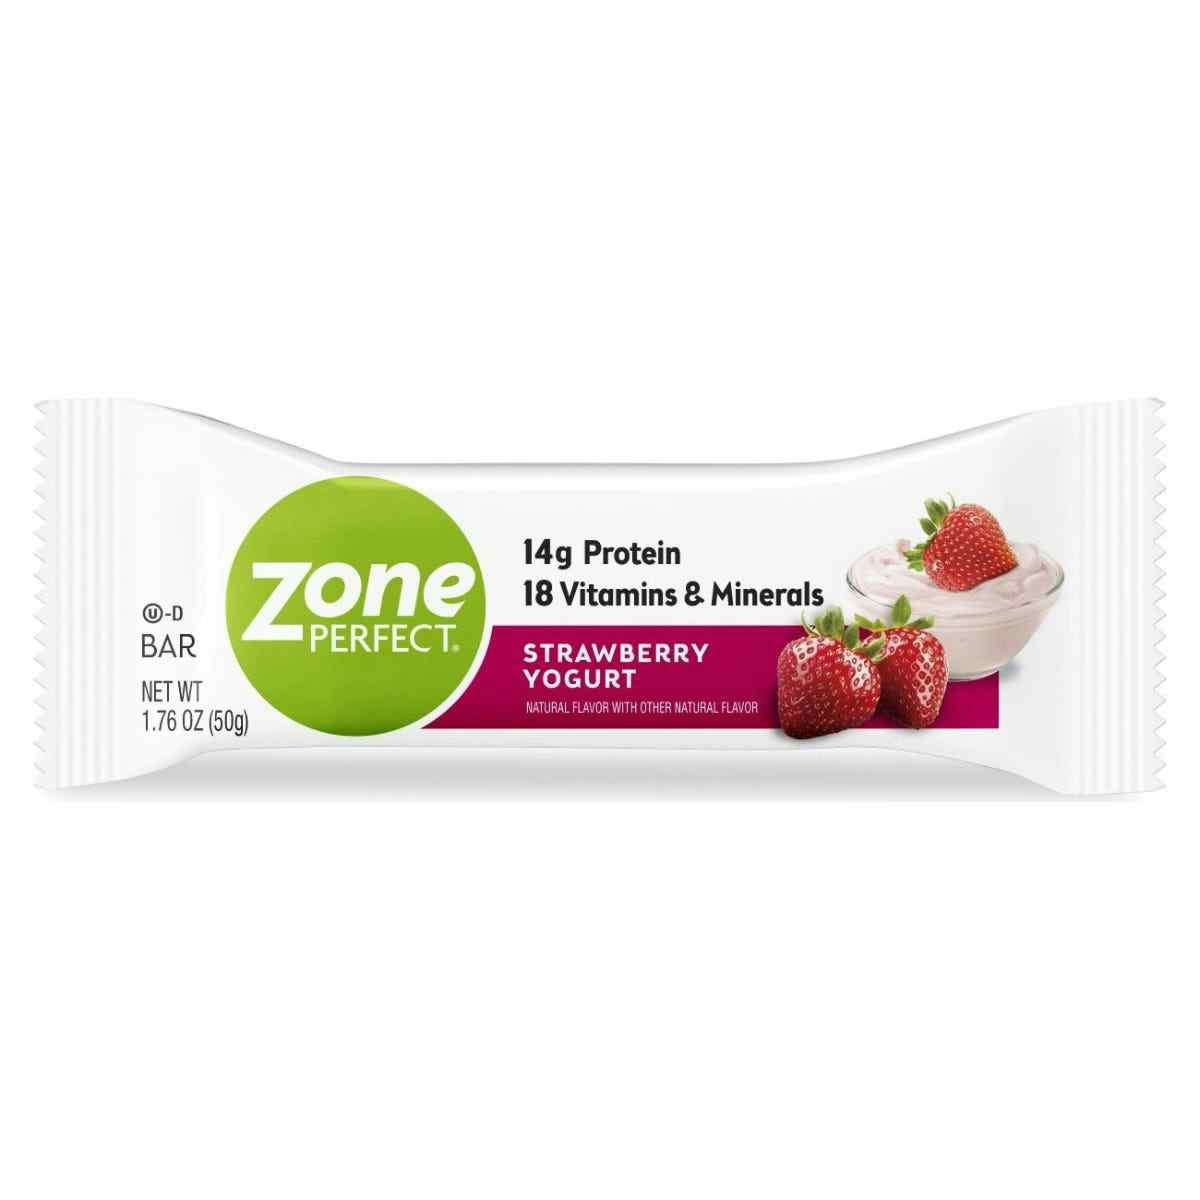 ZonePerfect Nutrition Bar